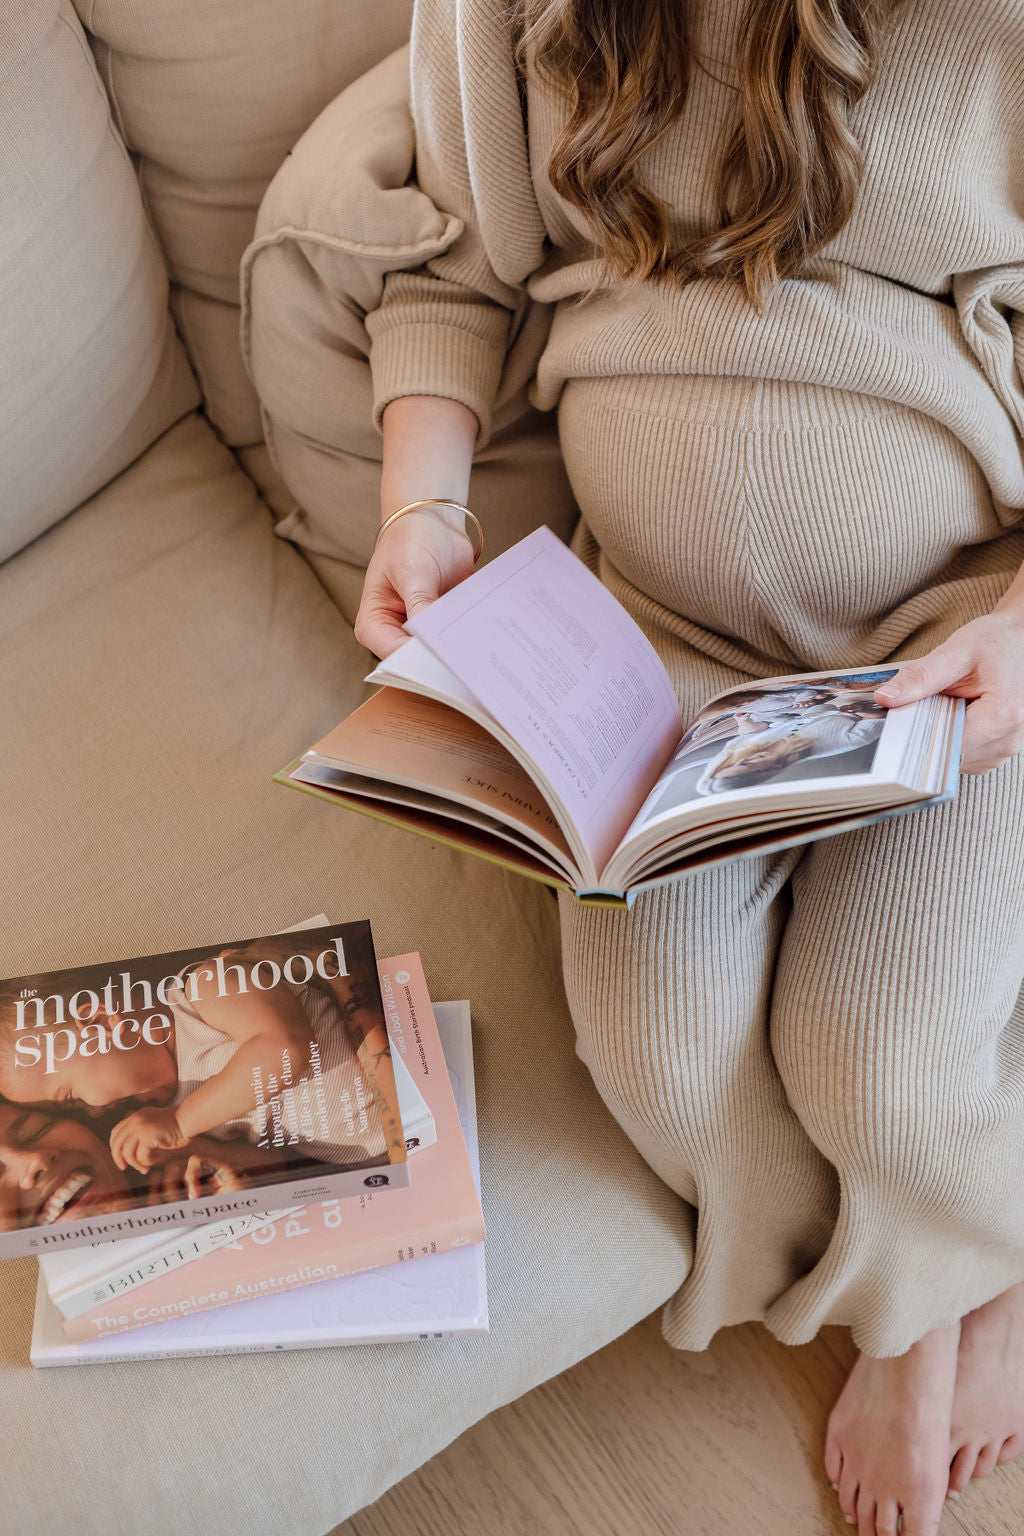 A pregnant woman reading a book on a couch.